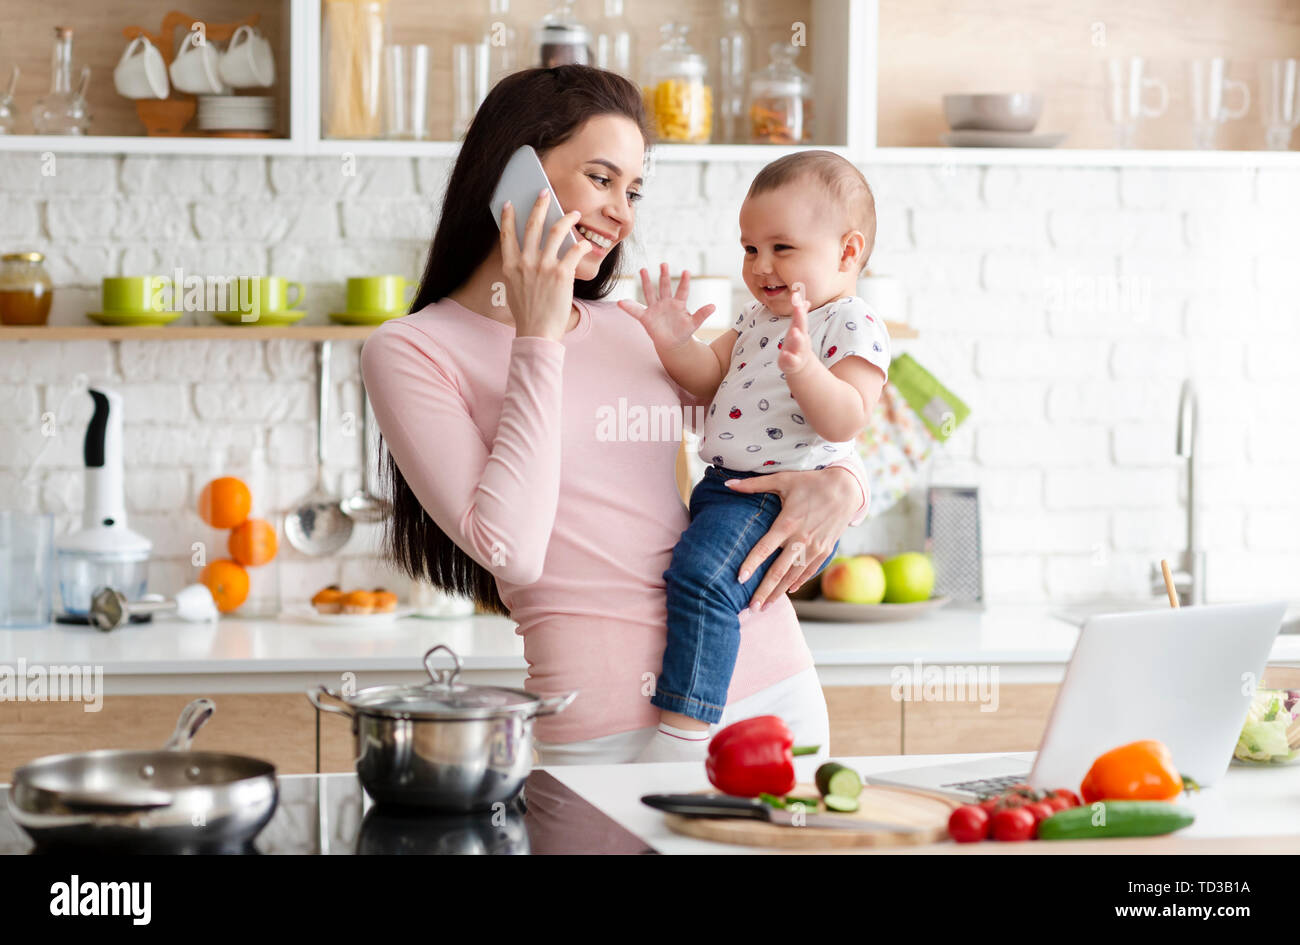 Mother talking on smartphone and holding adorable baby in kitchen Stock Photo